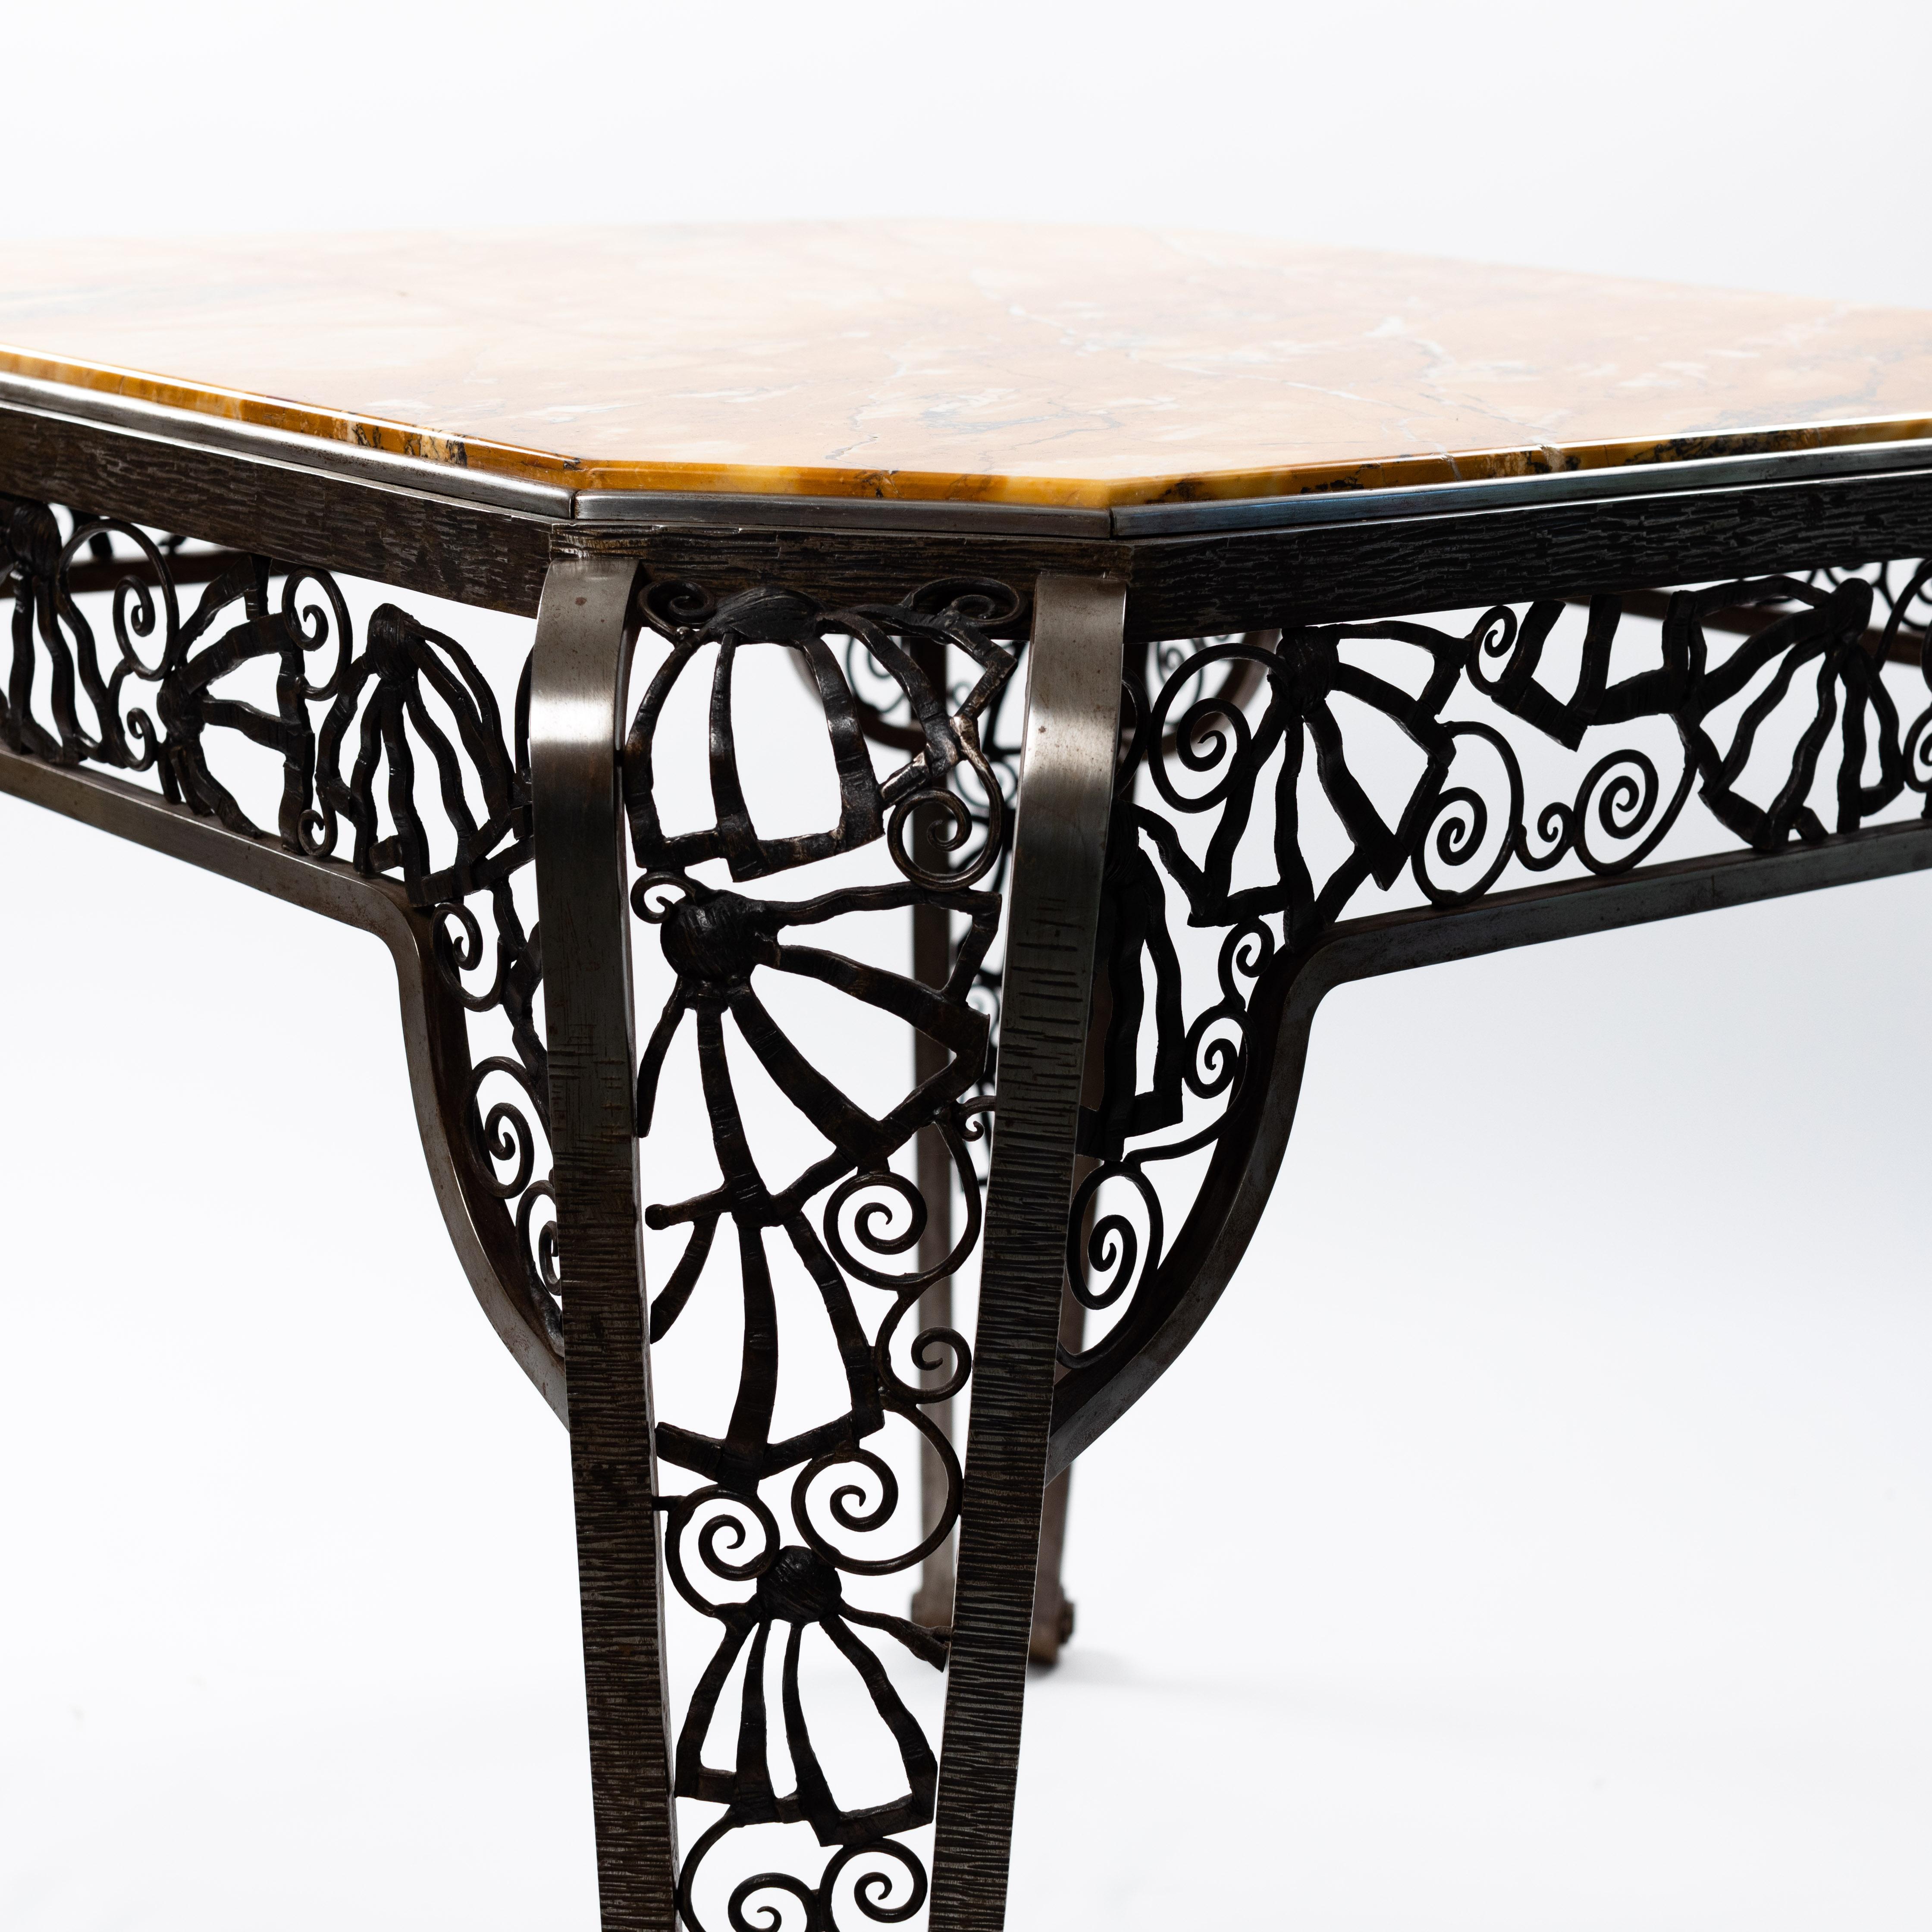 Wrought Iron French Forged Iron Art Déco Center Table by Malatre Et Tonnelier, 1930s For Sale